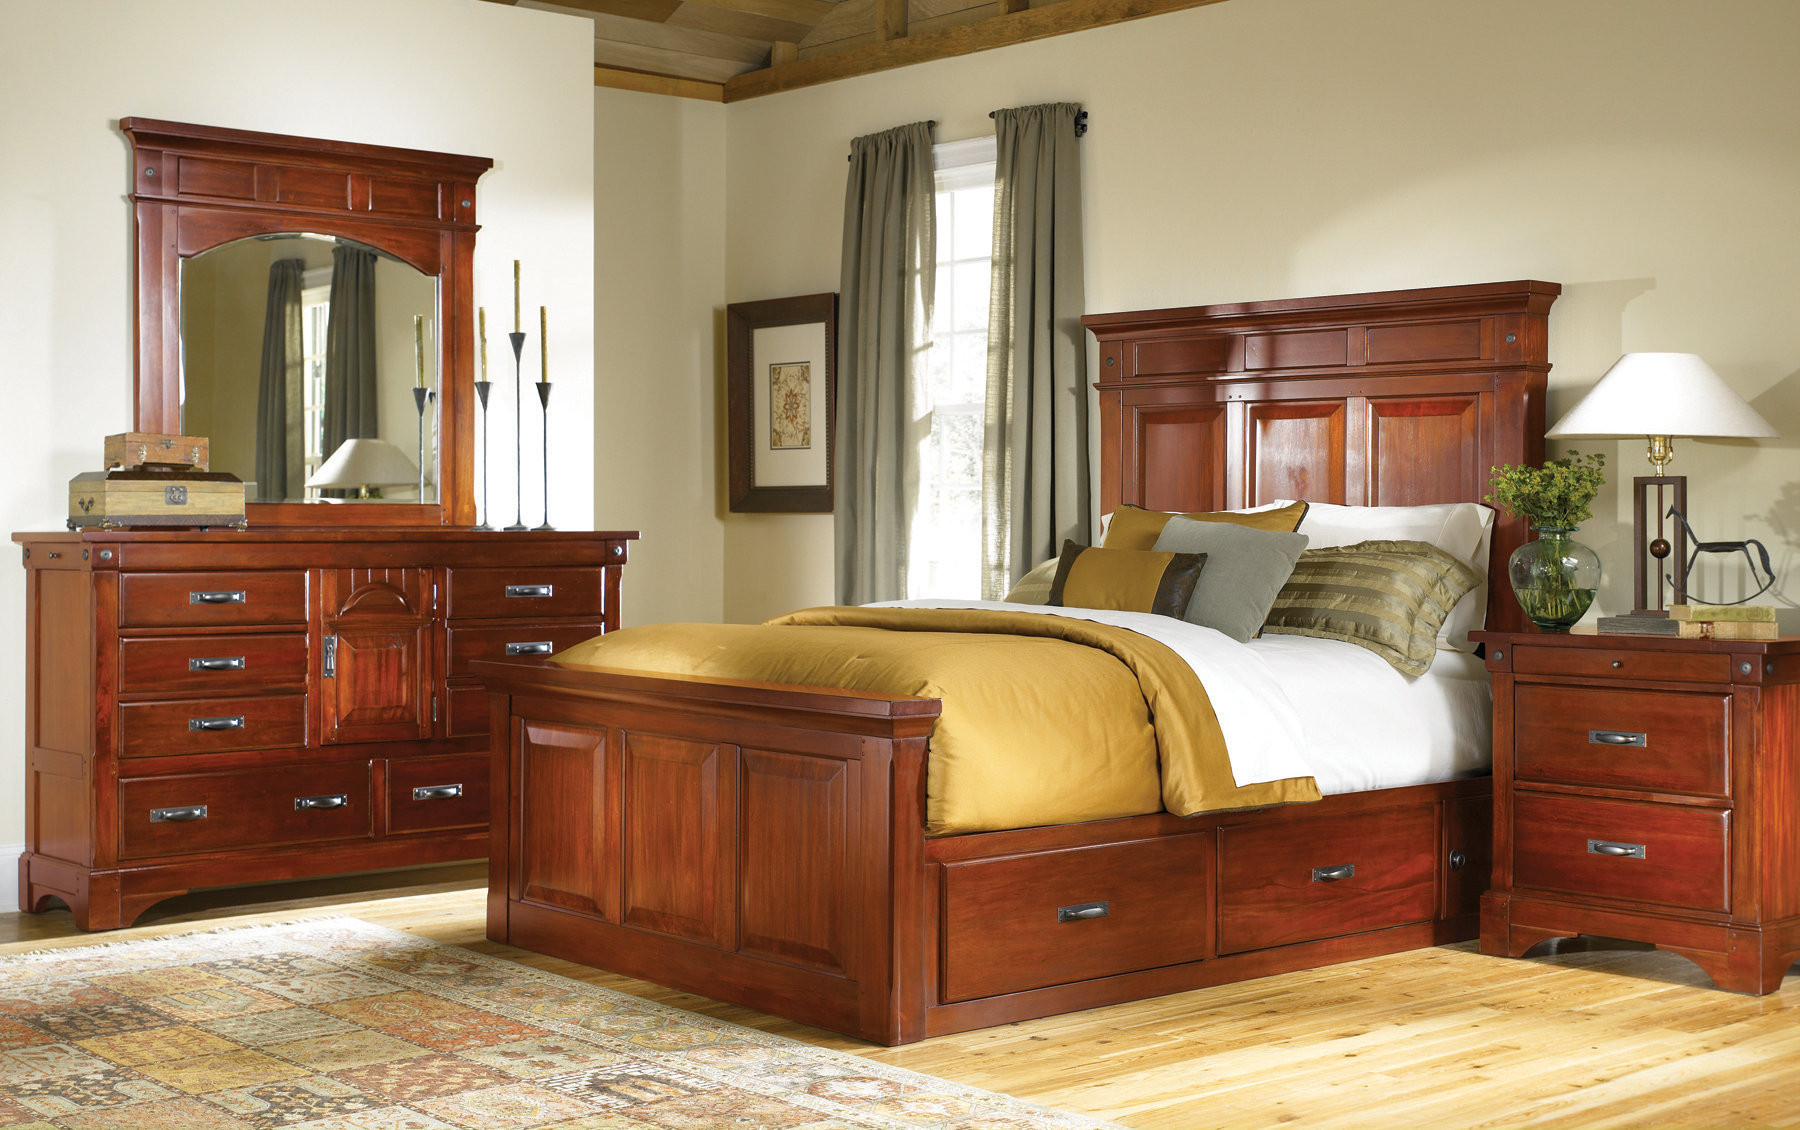 Storage Bedroom Set
 Mahogany Storage Bed Classic King and Queen Solid Wood